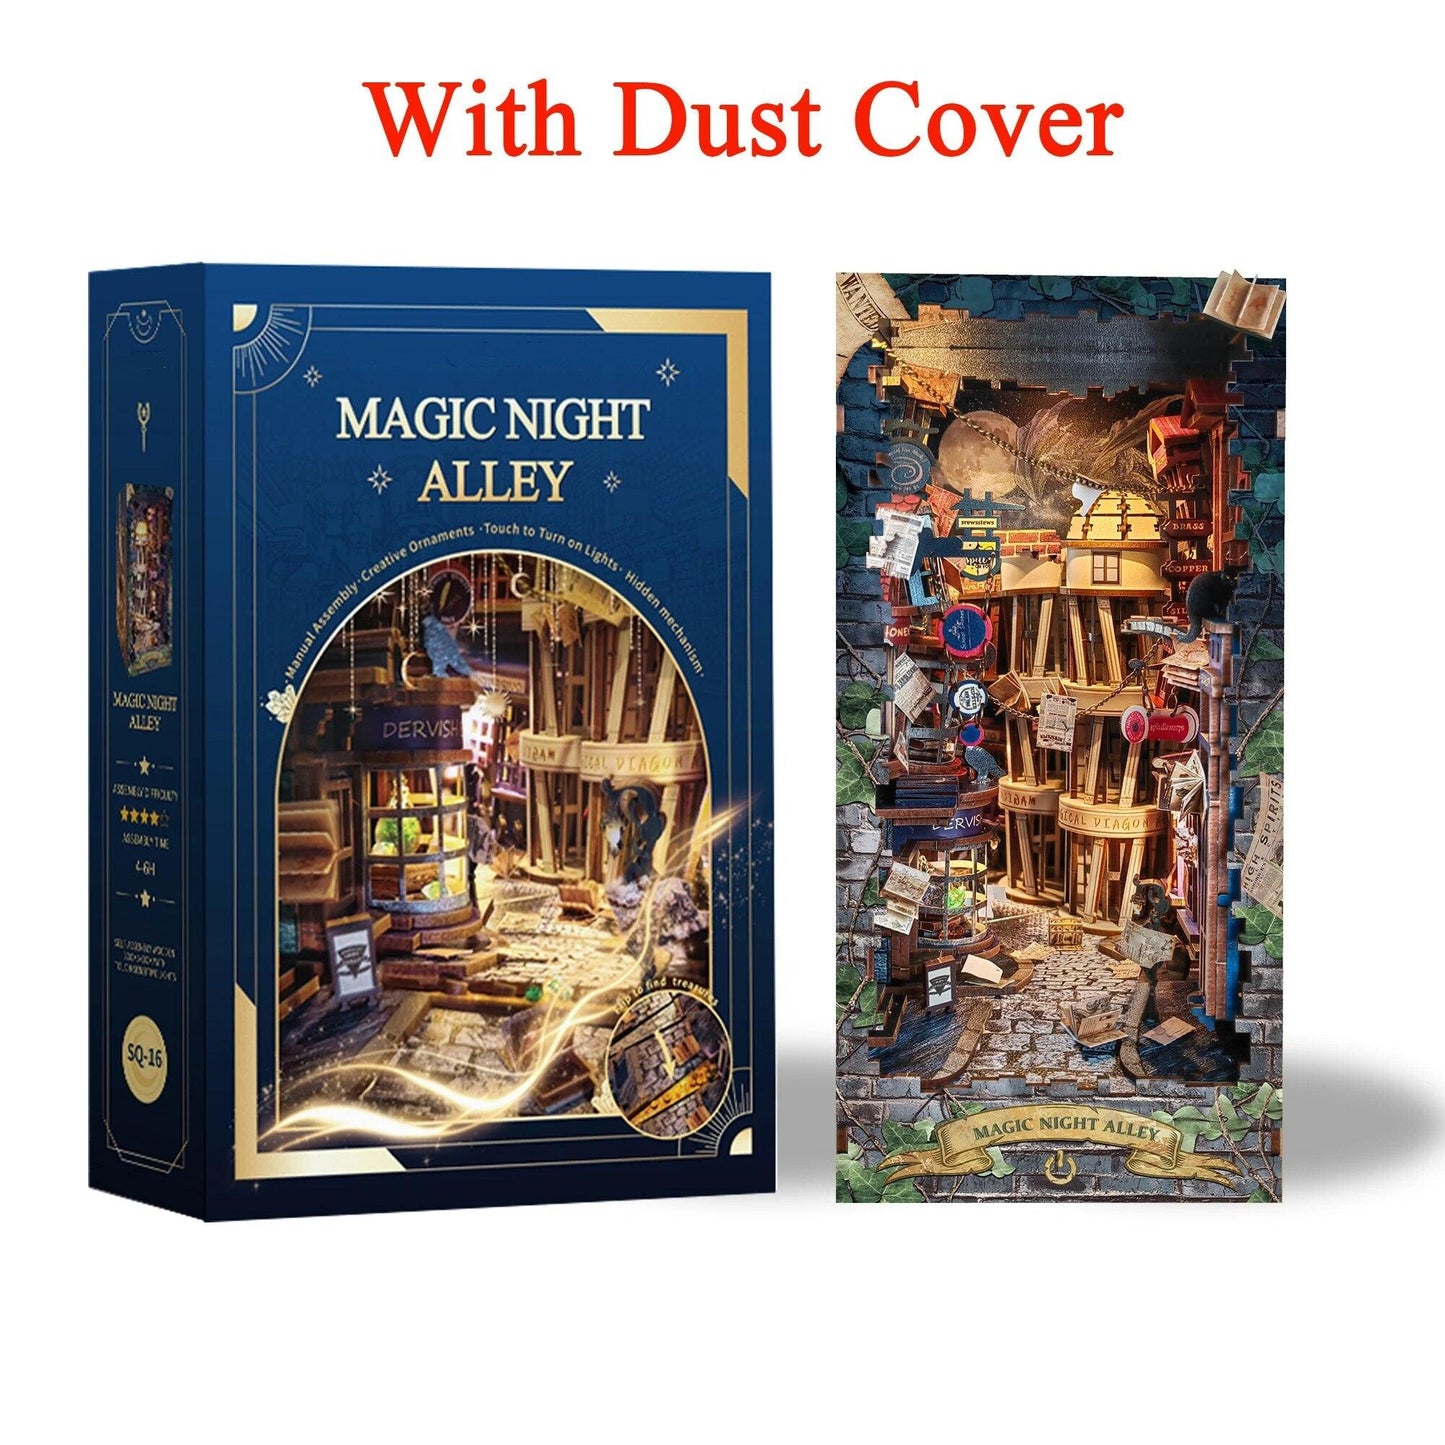 DIY Magic Night Alley Book Nook - DIY Book Nook Kits - Wizard Alley Book Nook Dioramas Book Shelf Insert Book Scenery with LED Model Building Kit